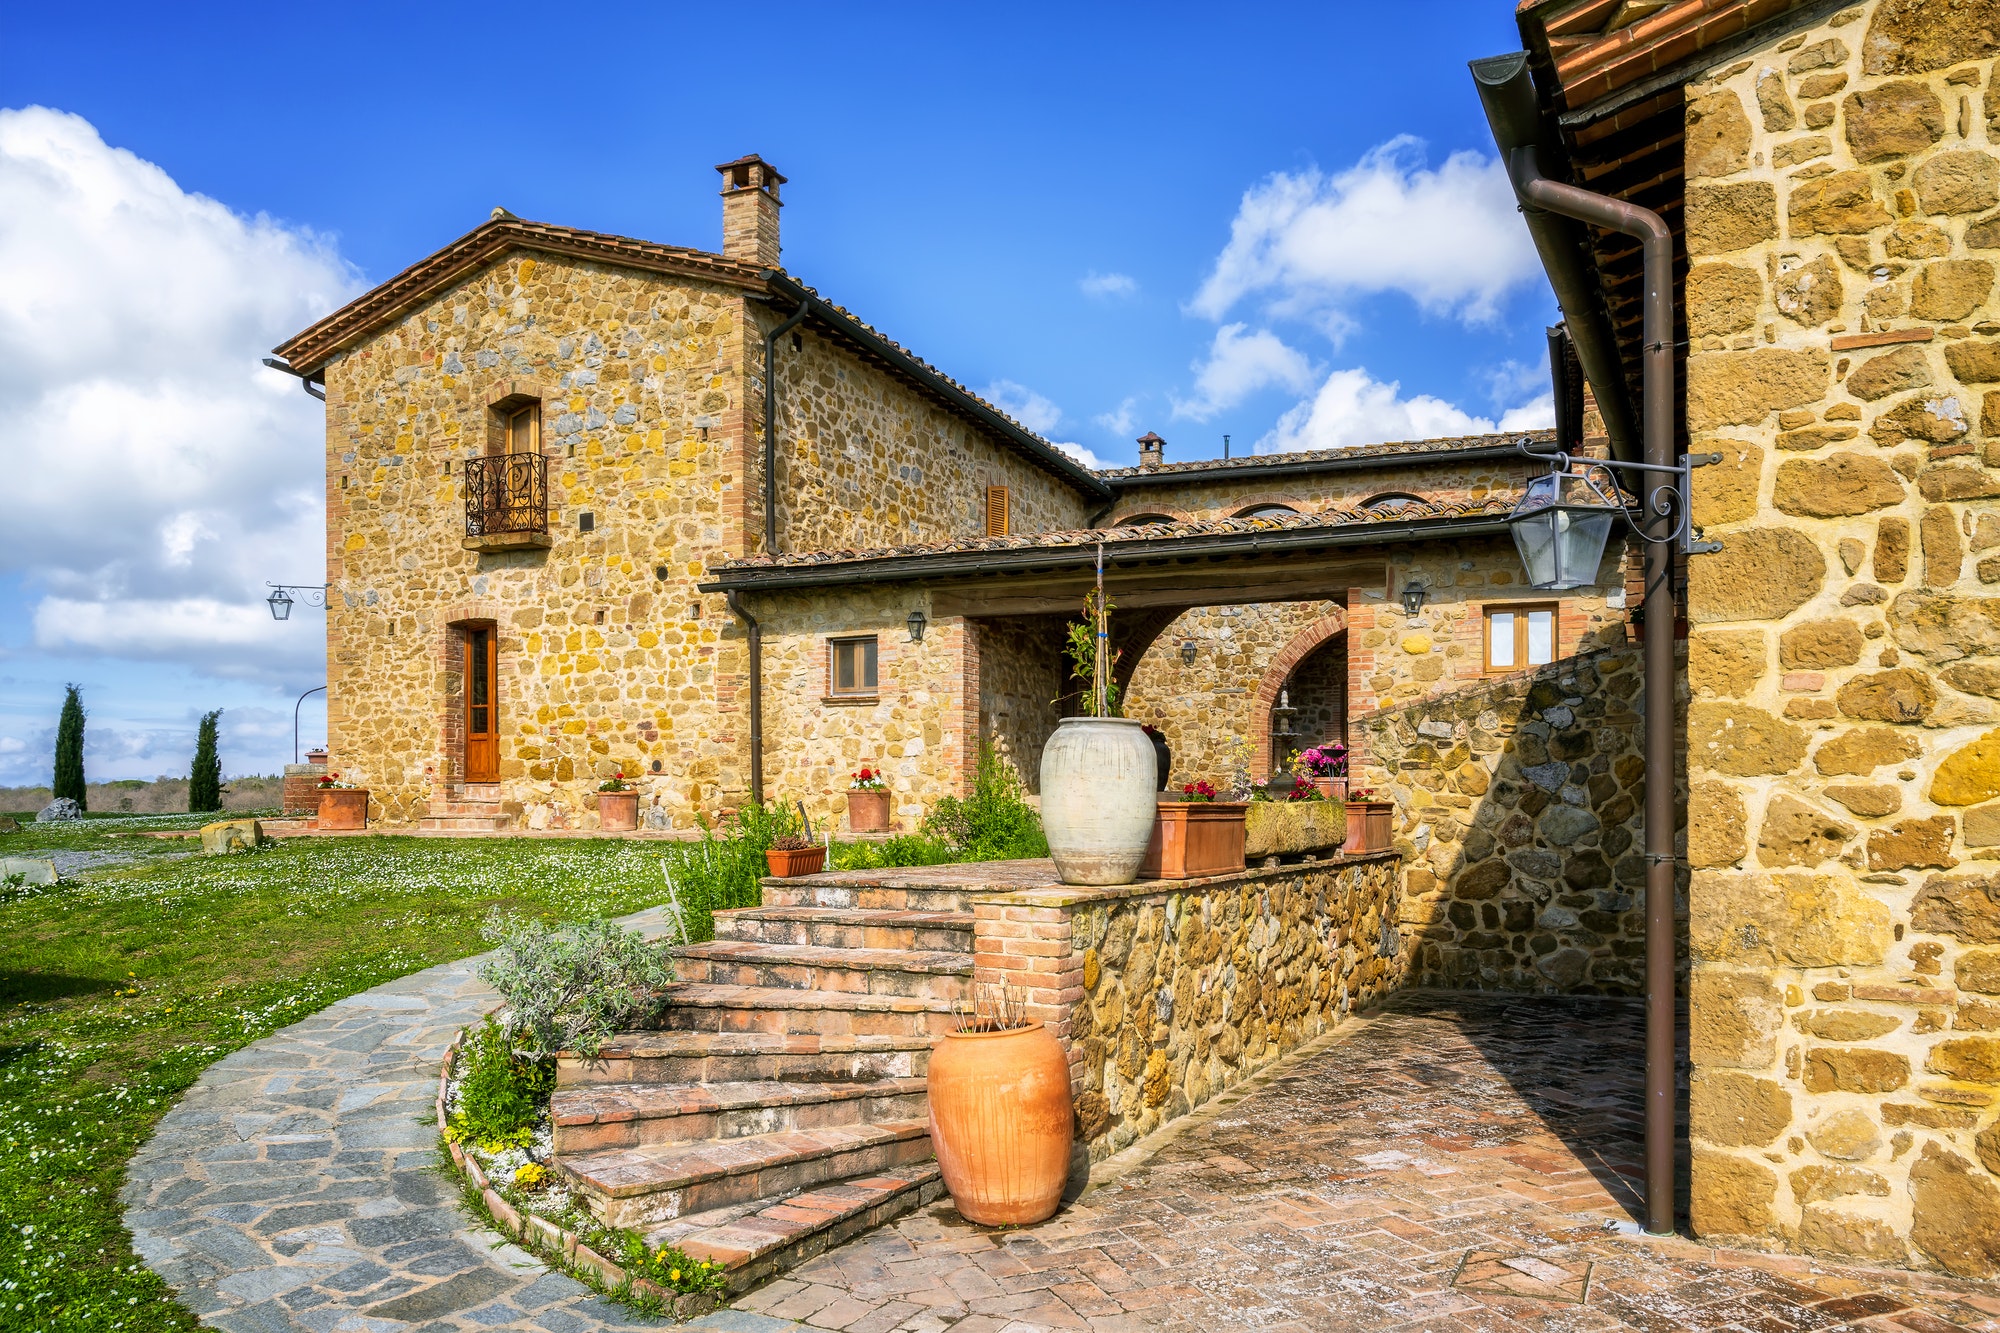 Beautiful exterior of an old villa in Tuscany